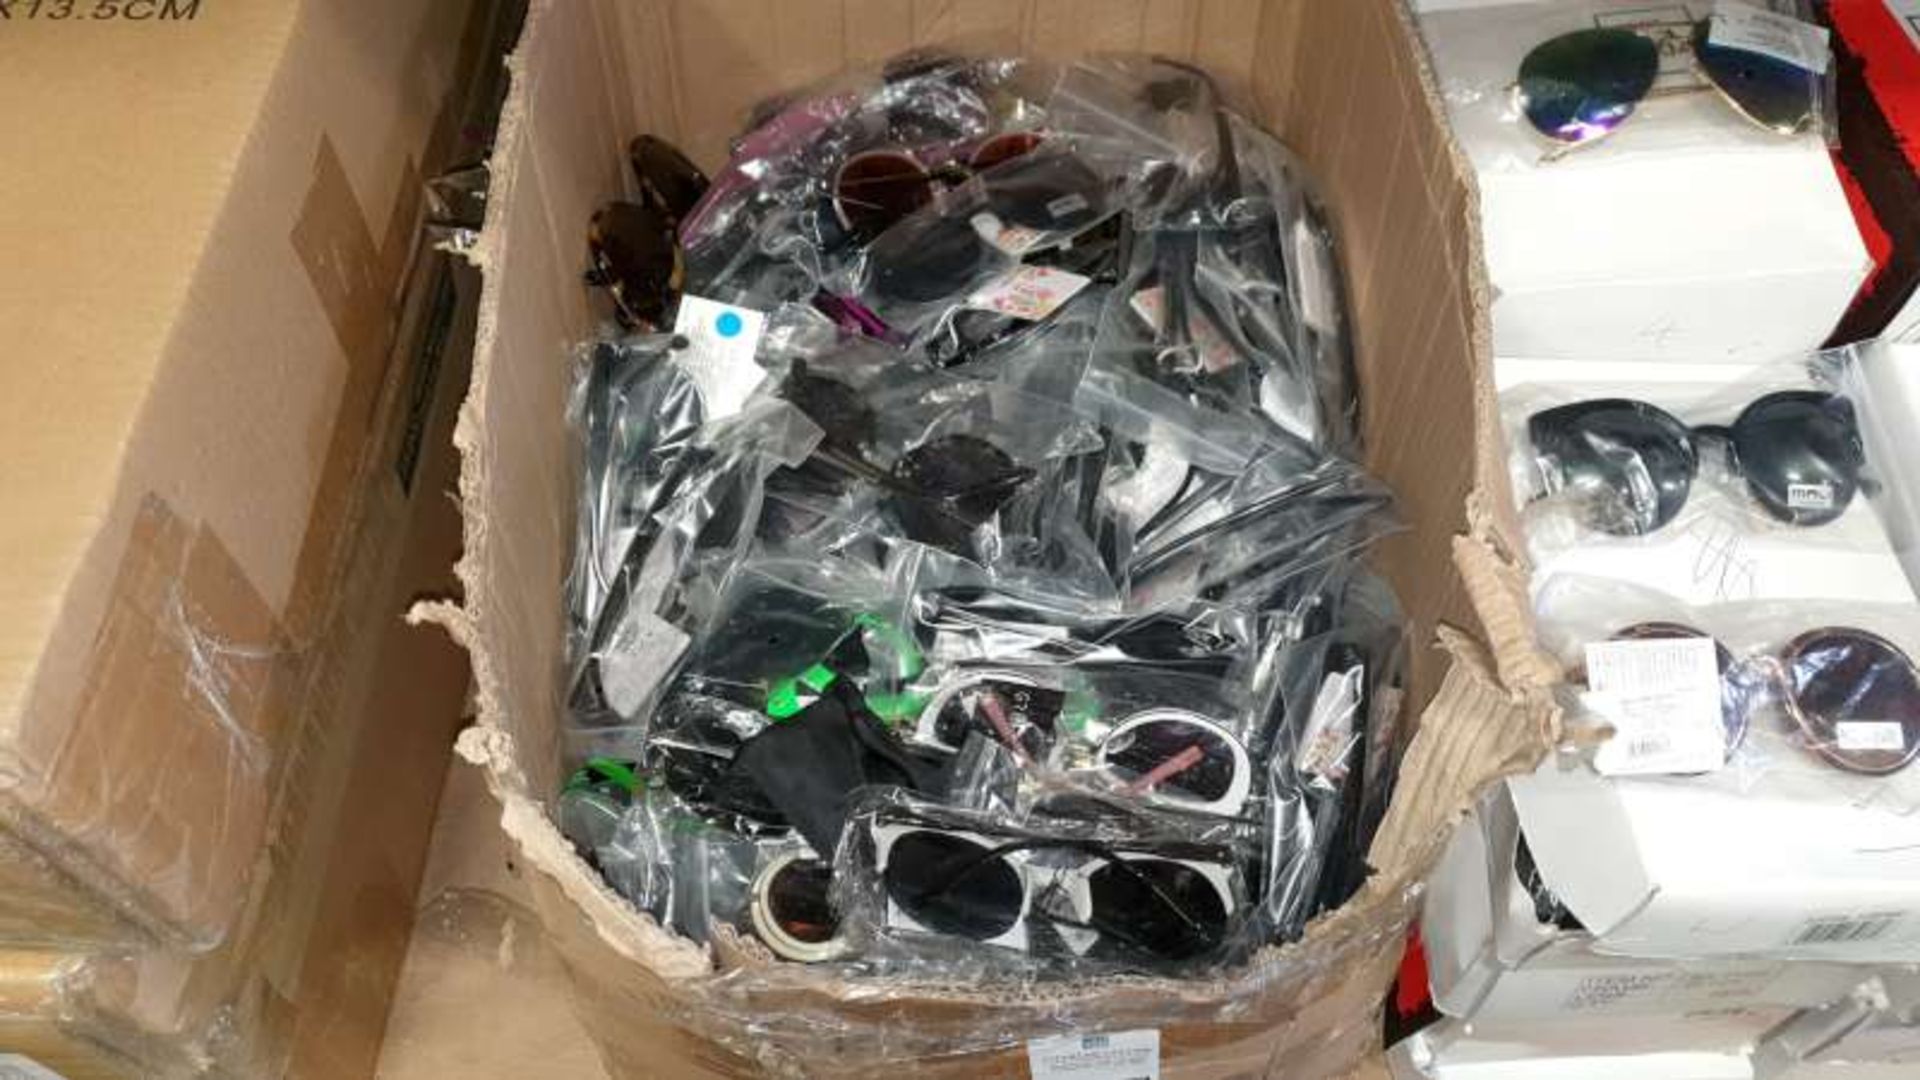 BOX CONTAINING A LARGE QTY OF SUNGLASSES IN VARIOUS STYLES